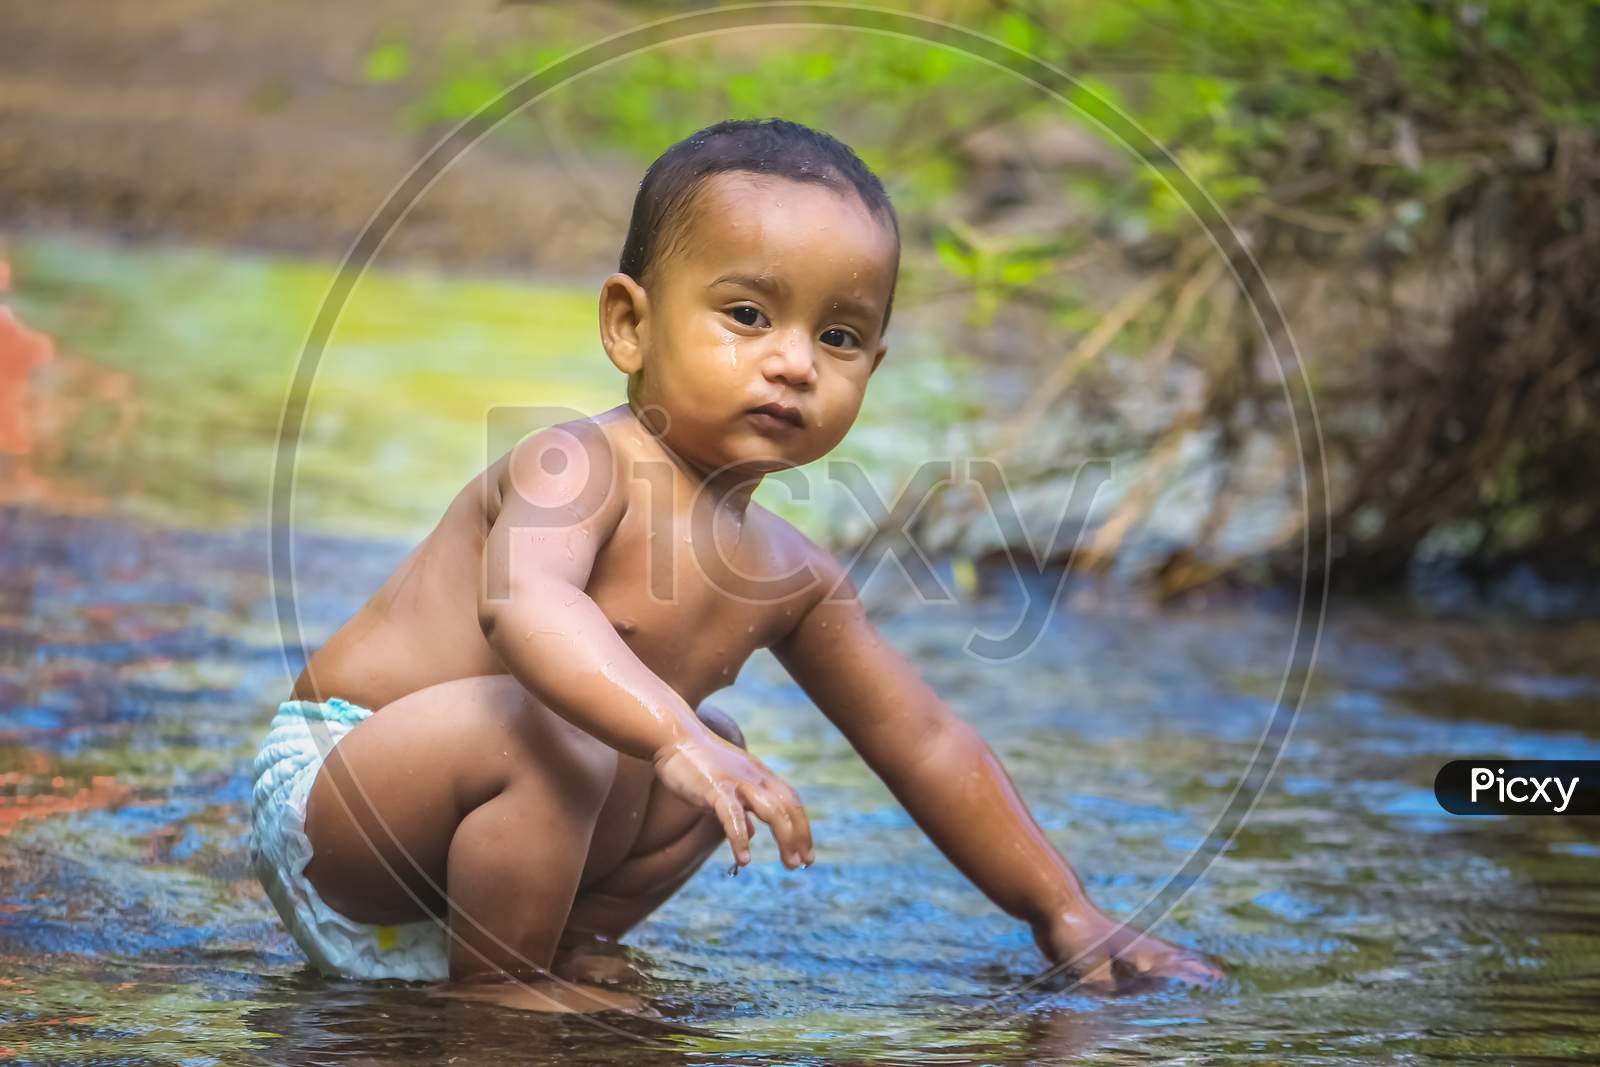 Baby Boy Stock Images -  Little Cute Baby Boy Playing In River Water. Portrait of Boy Child Having Fun and Joy On a Forest River. Little Funny Boy Playing In Water.